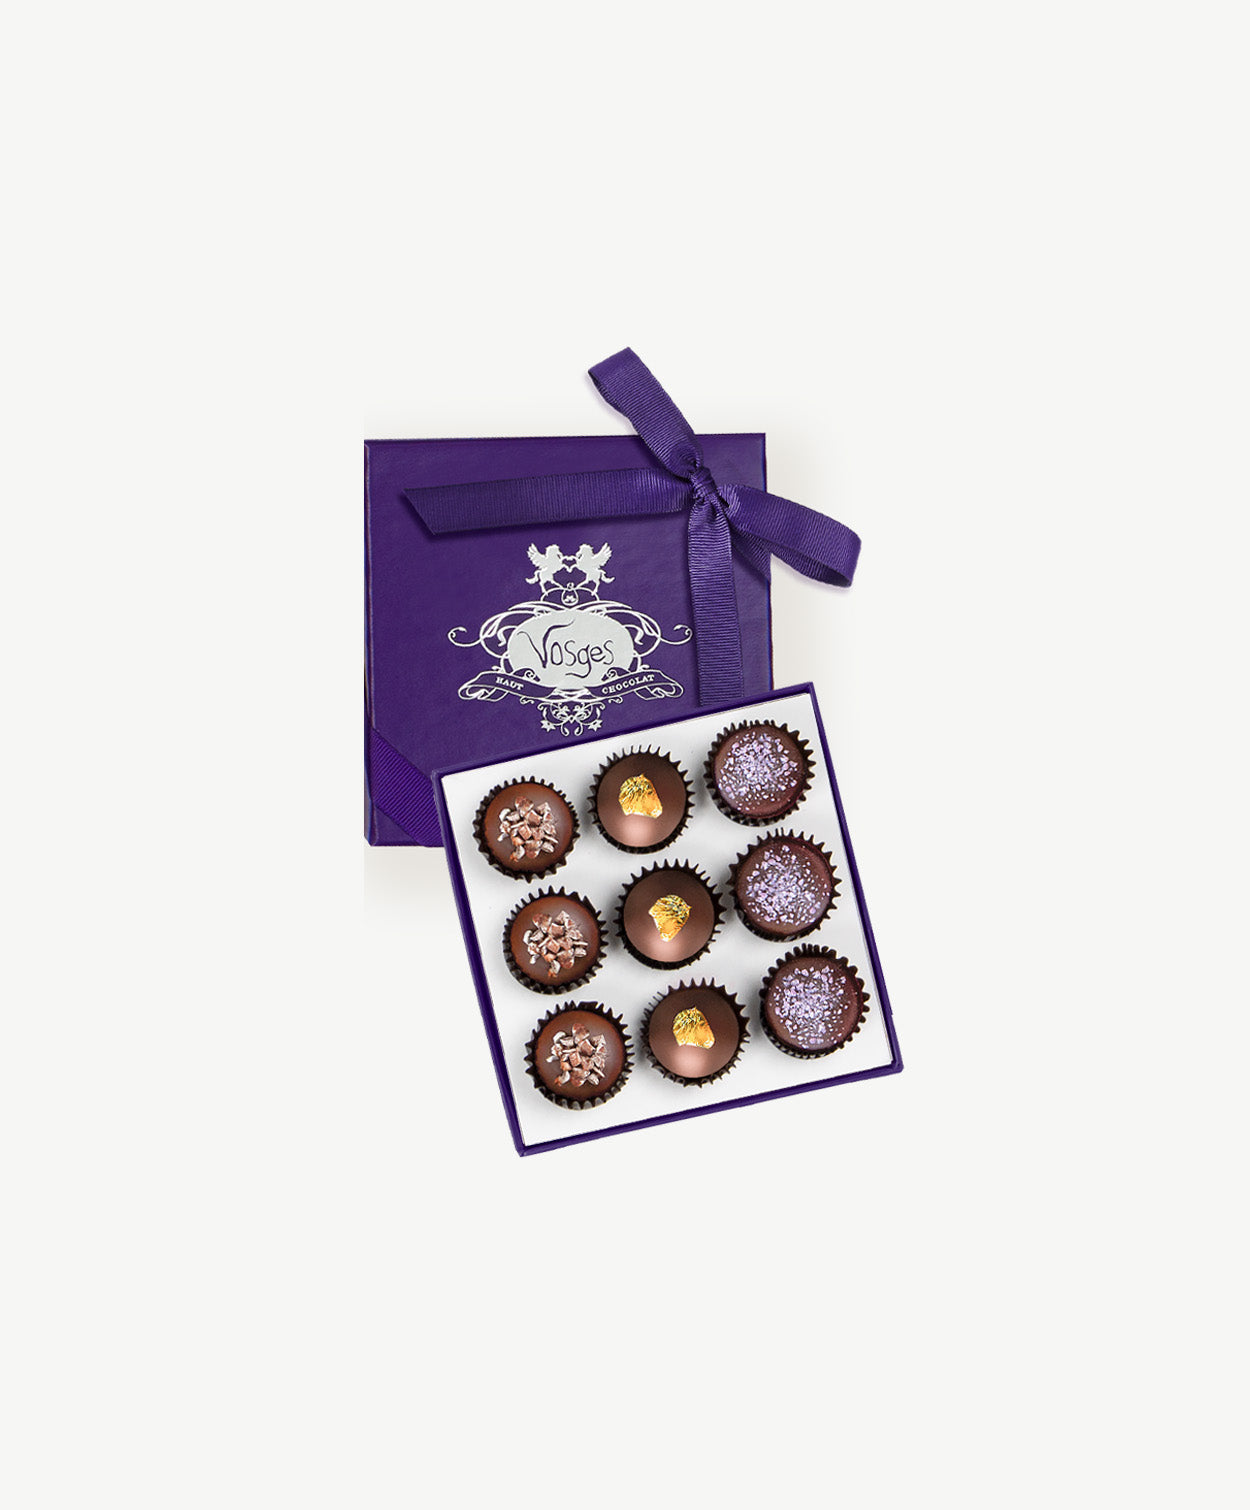 An open purple candy box displaying nine milk chocolate praline truffles topped with gold leaf, candied violets and coco nibs on a white background.